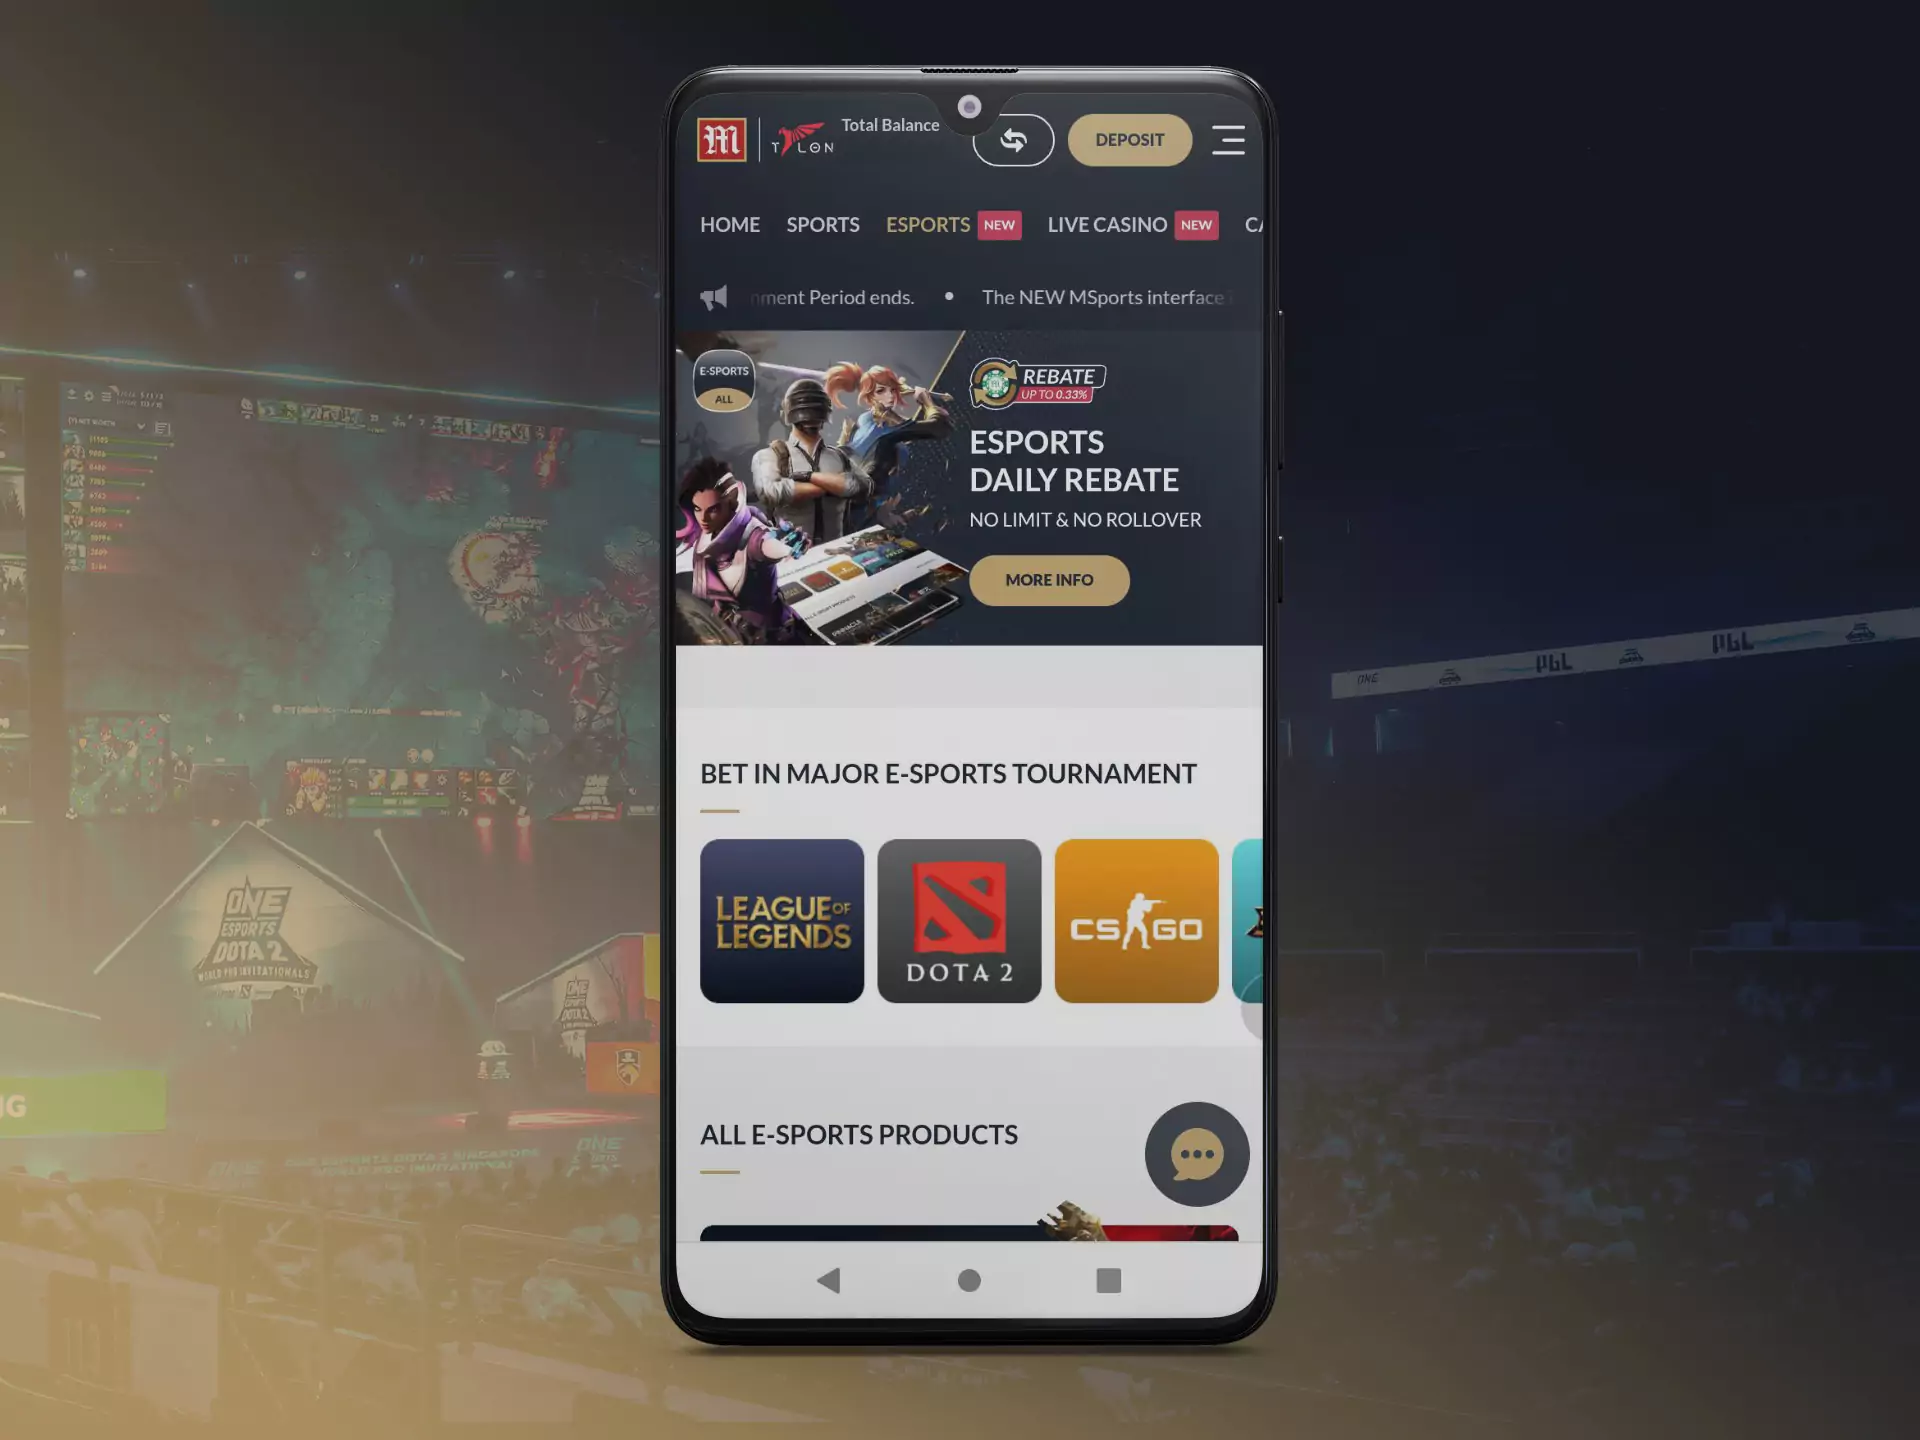 Users often place bets on esports tournaments as well.